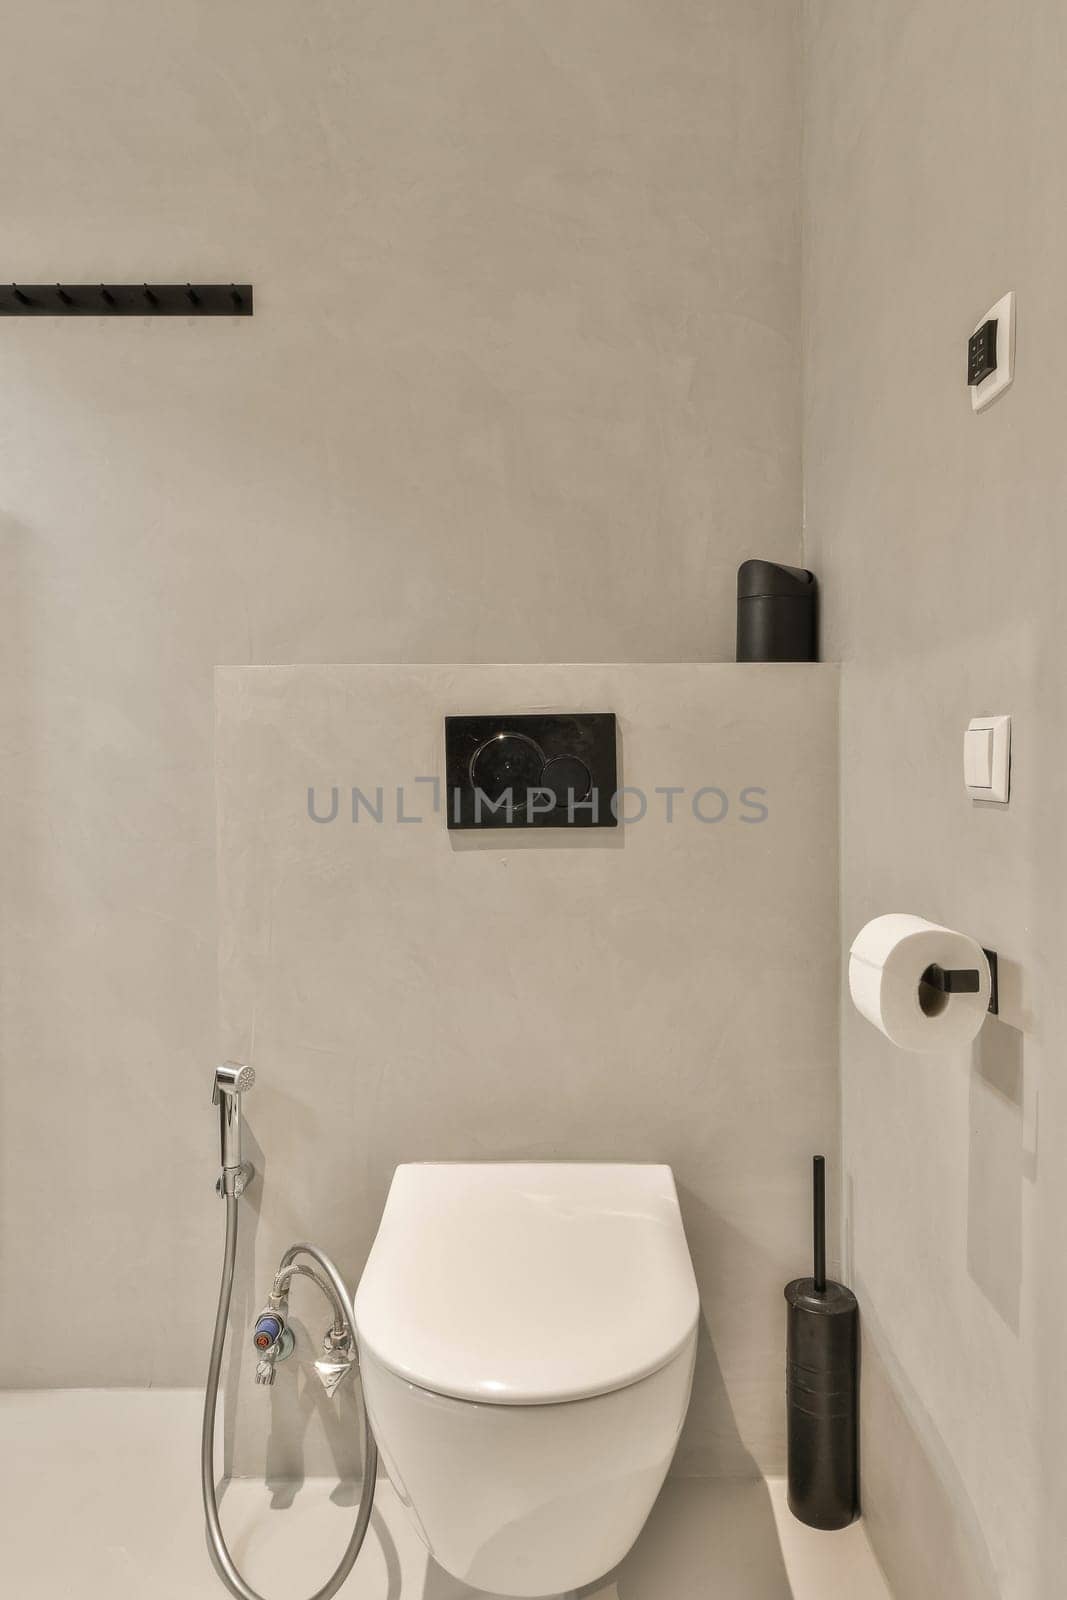 a bathroom with a toilet and shower head mounted on the wall next to it is an image of a man's face